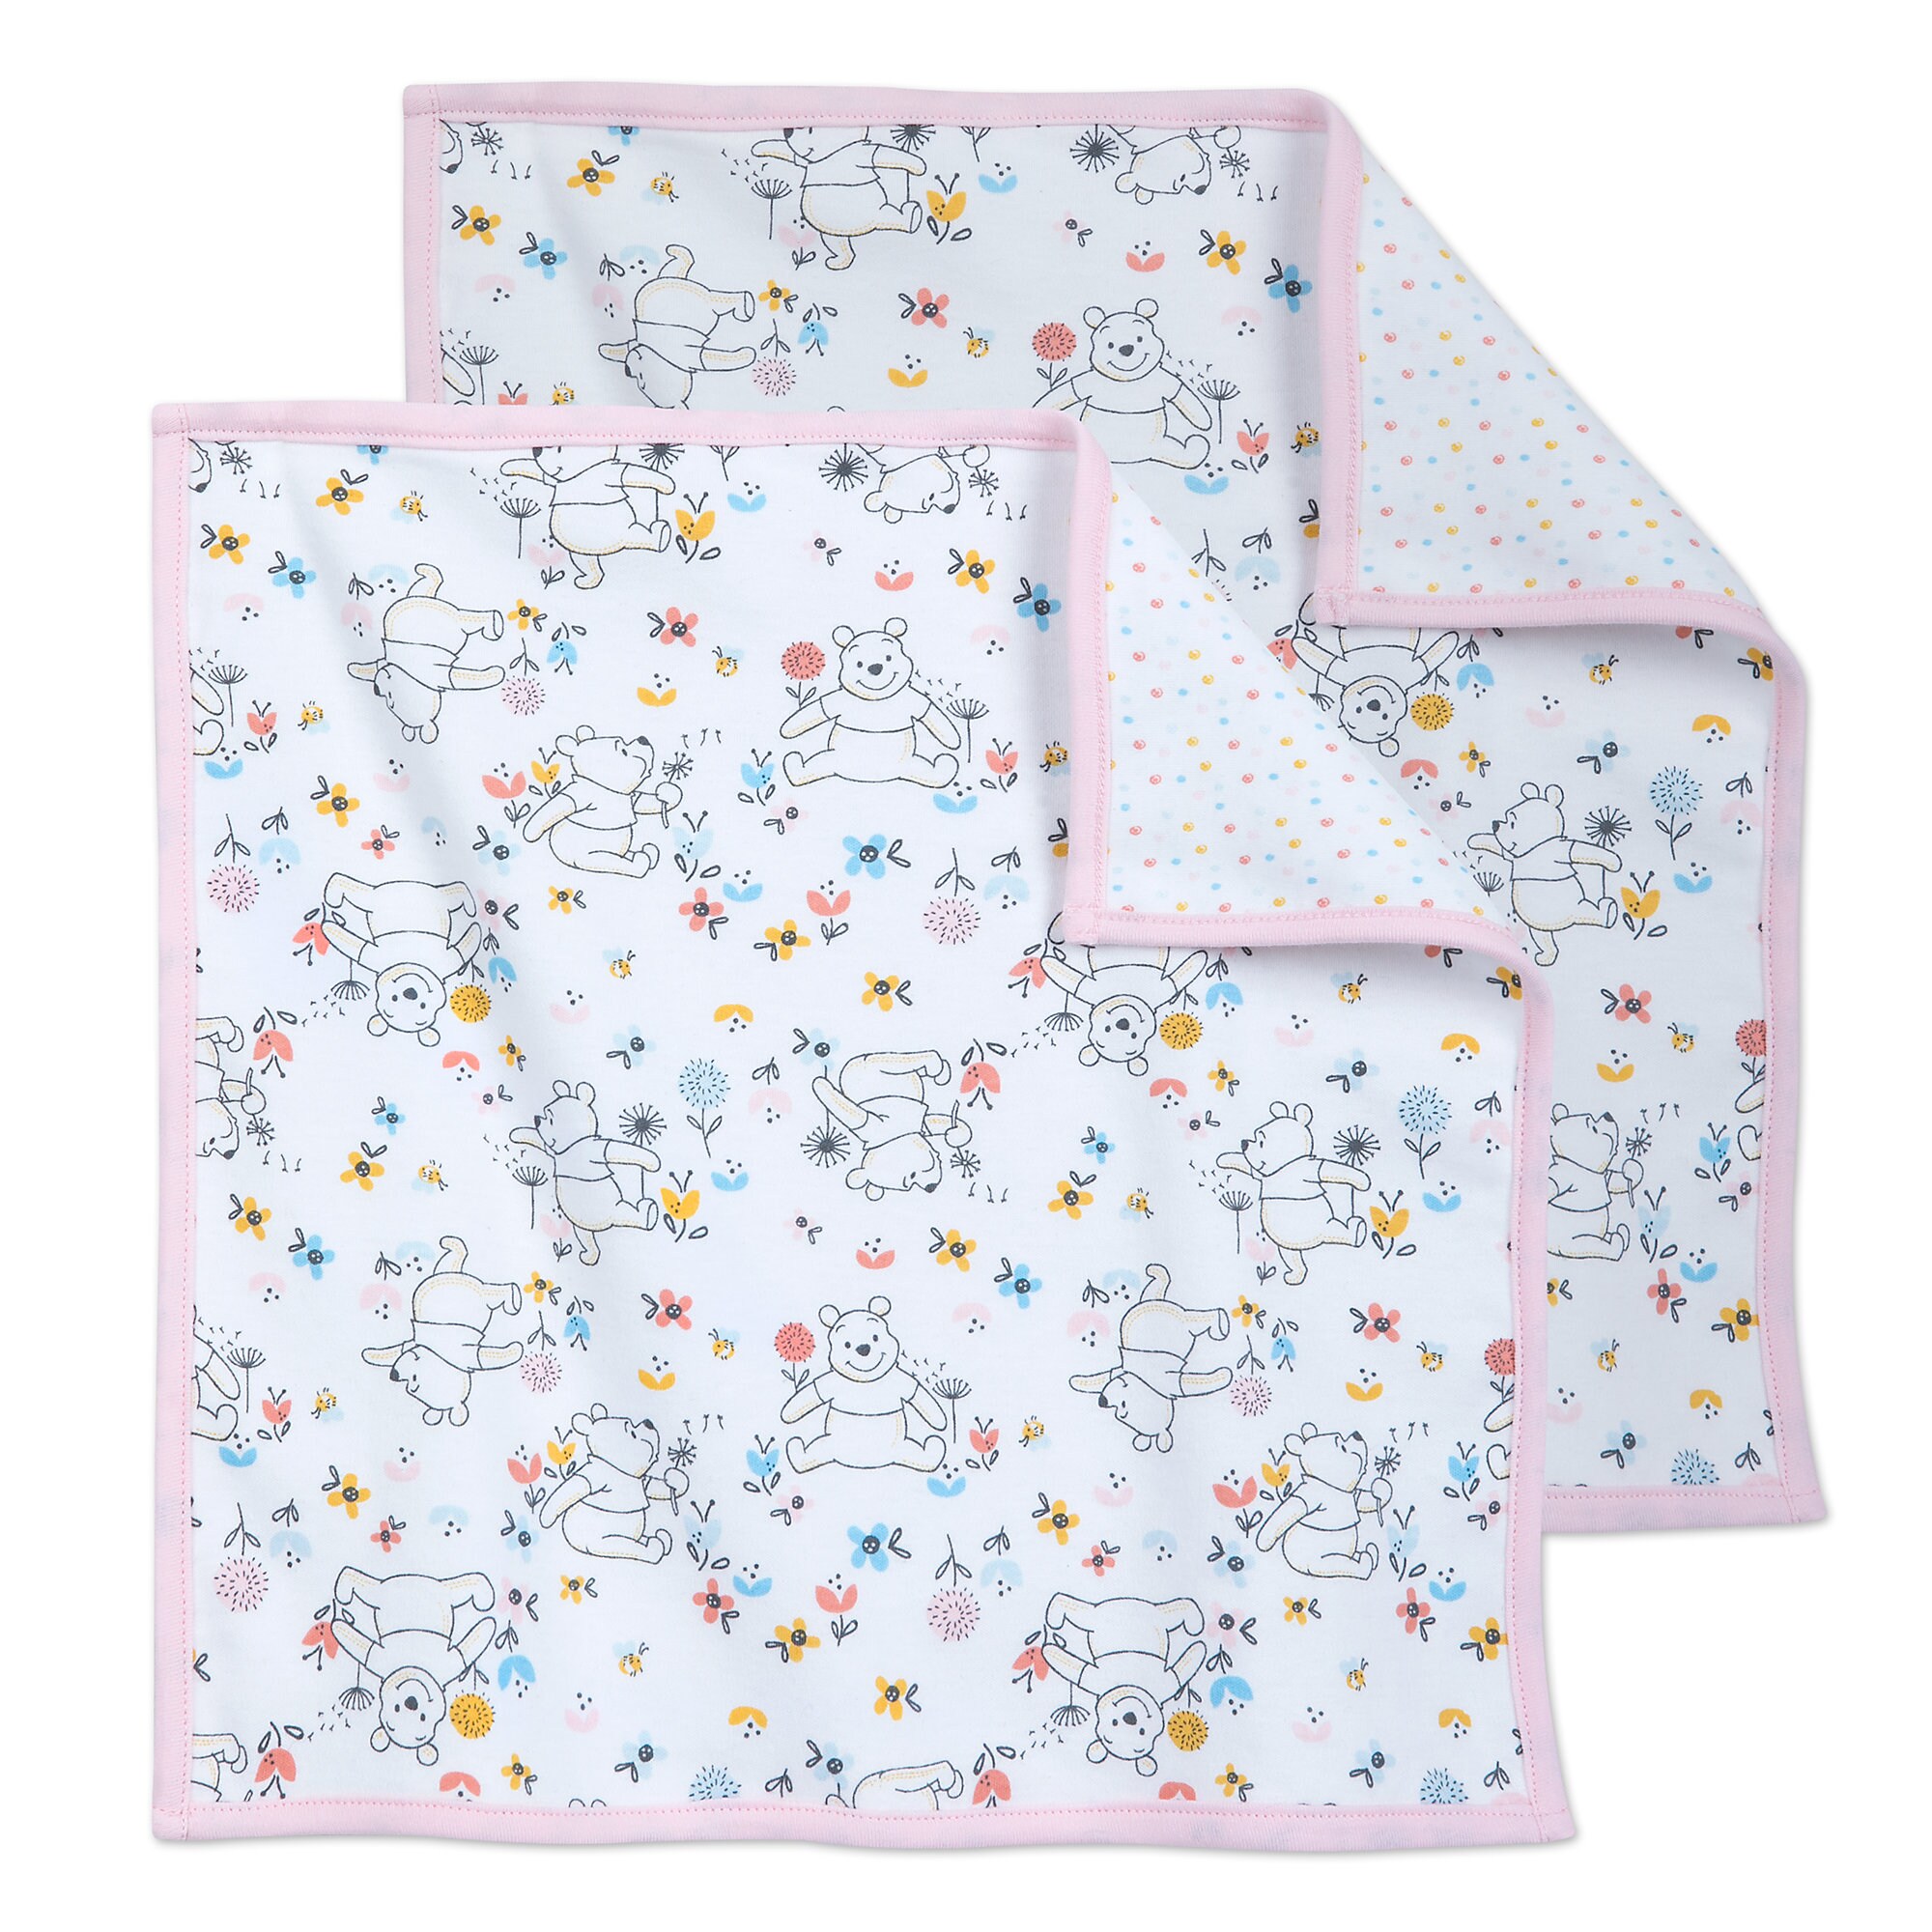 Winnie the Pooh Gift Set for Baby - Pink